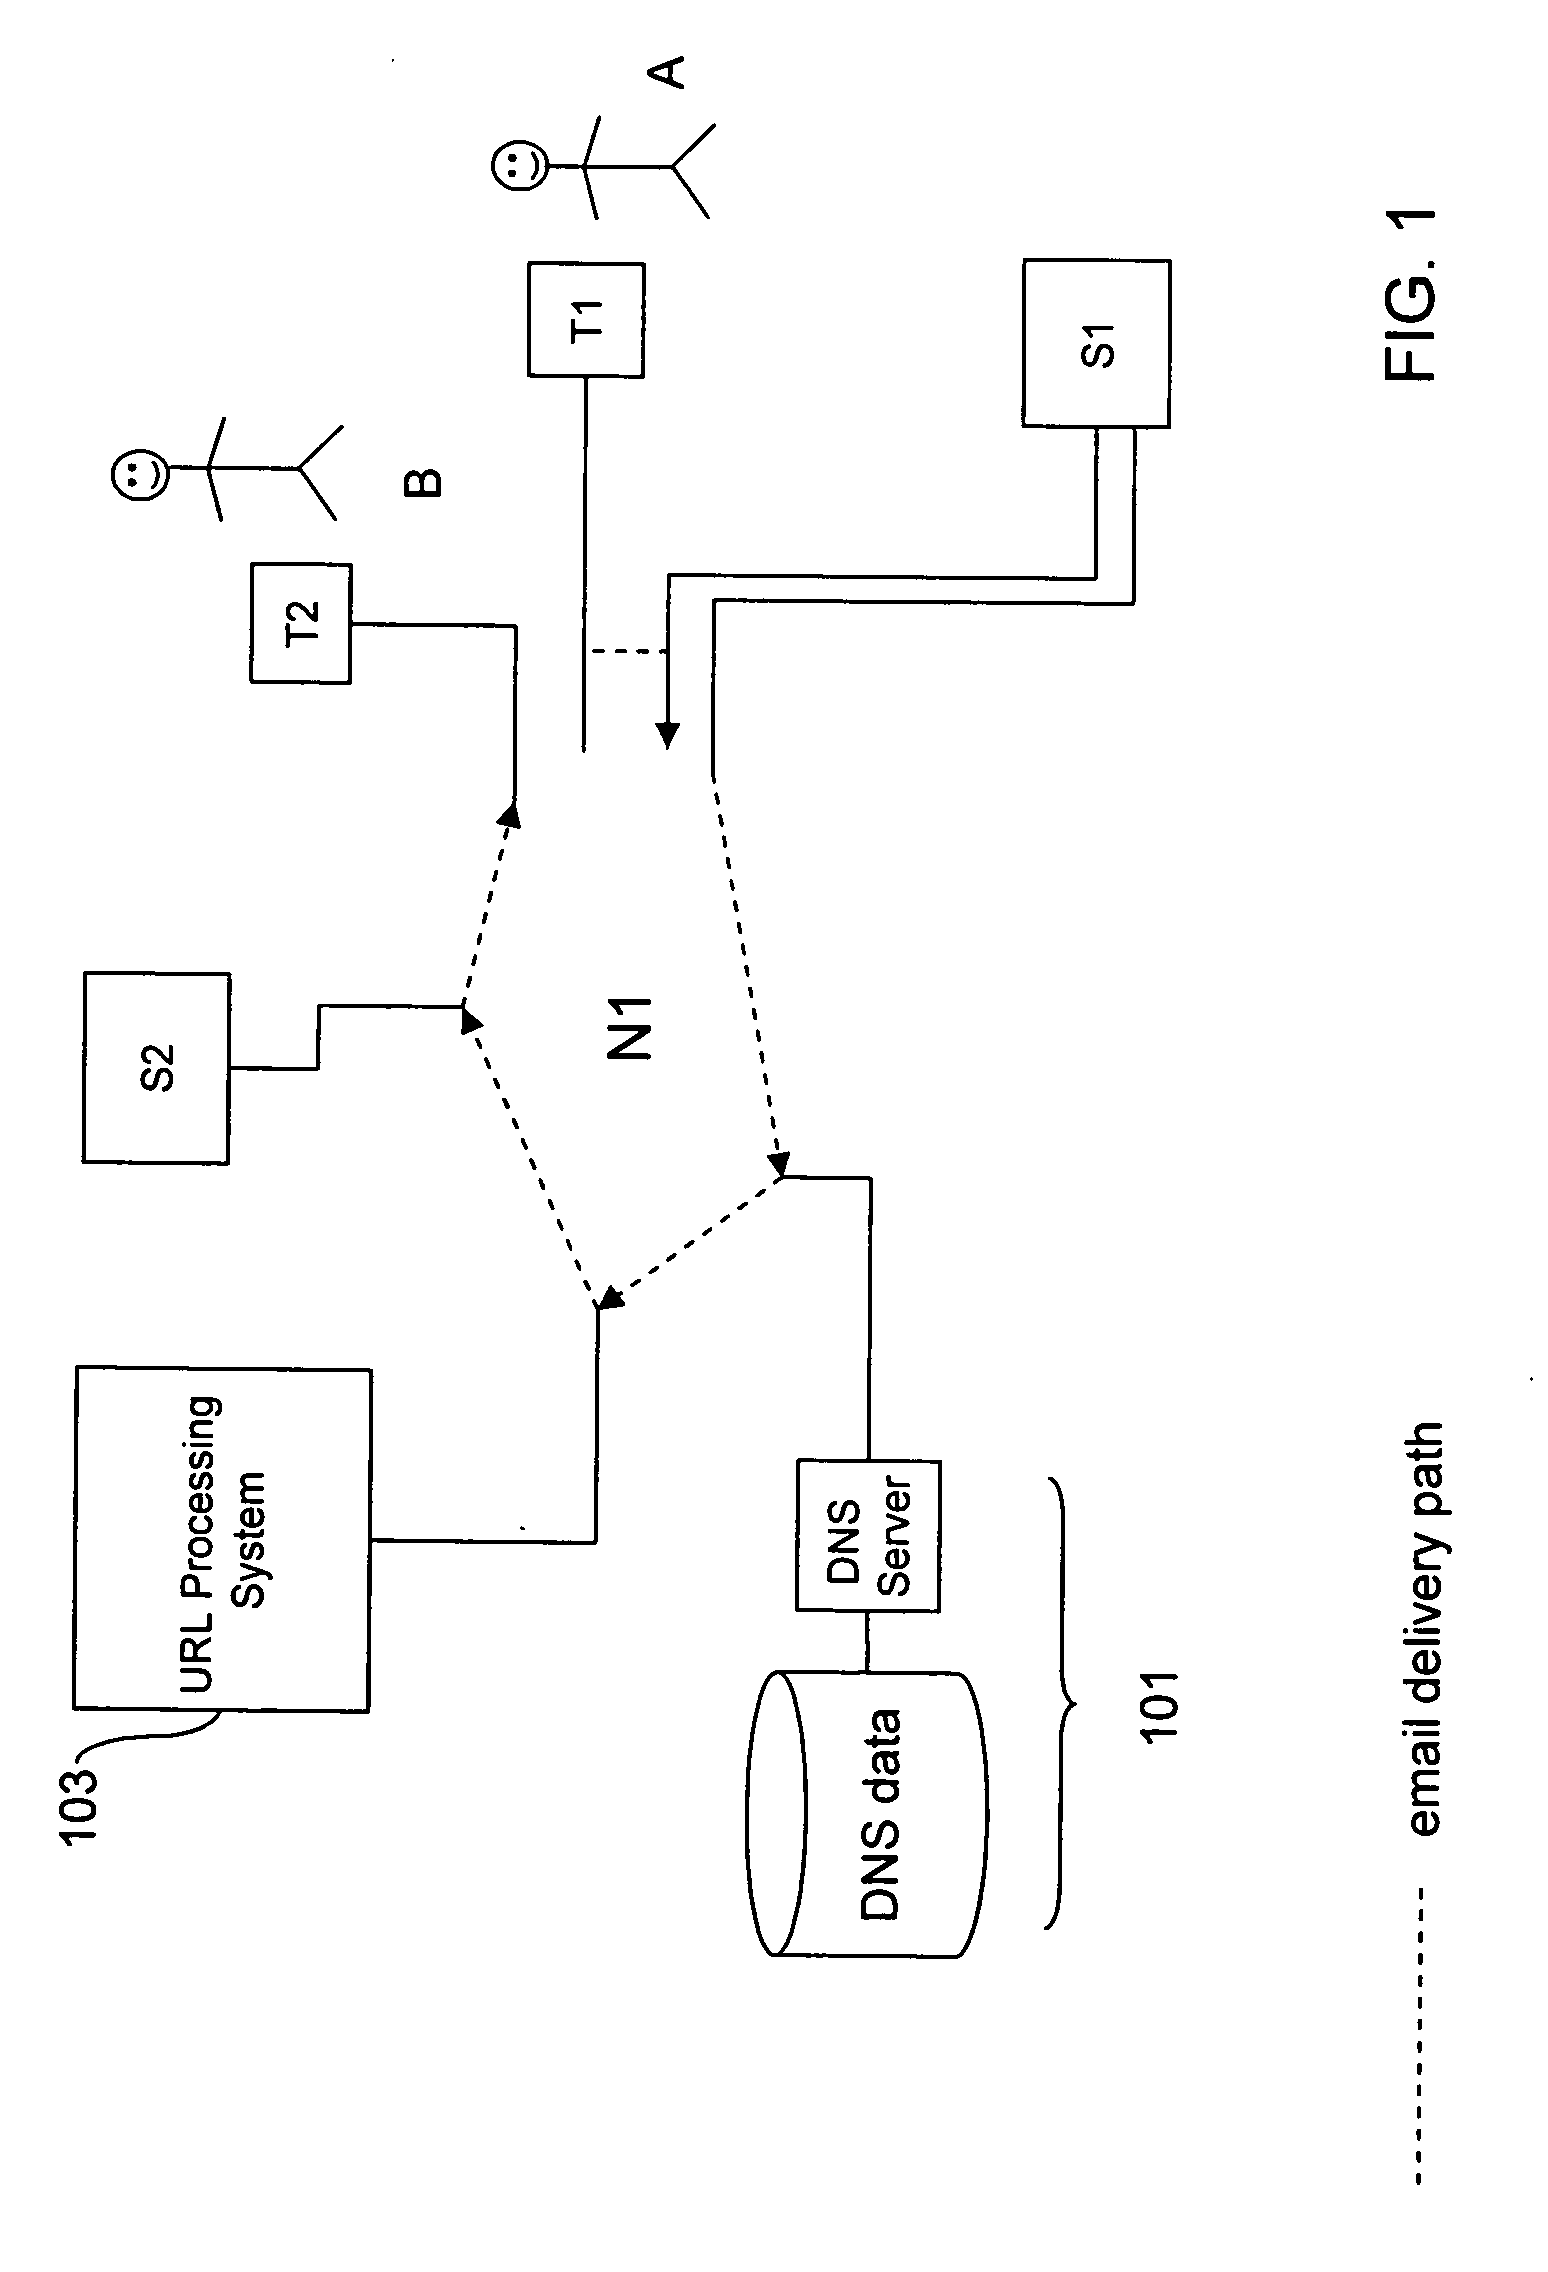 Method and System for Filtering Electronic Messages